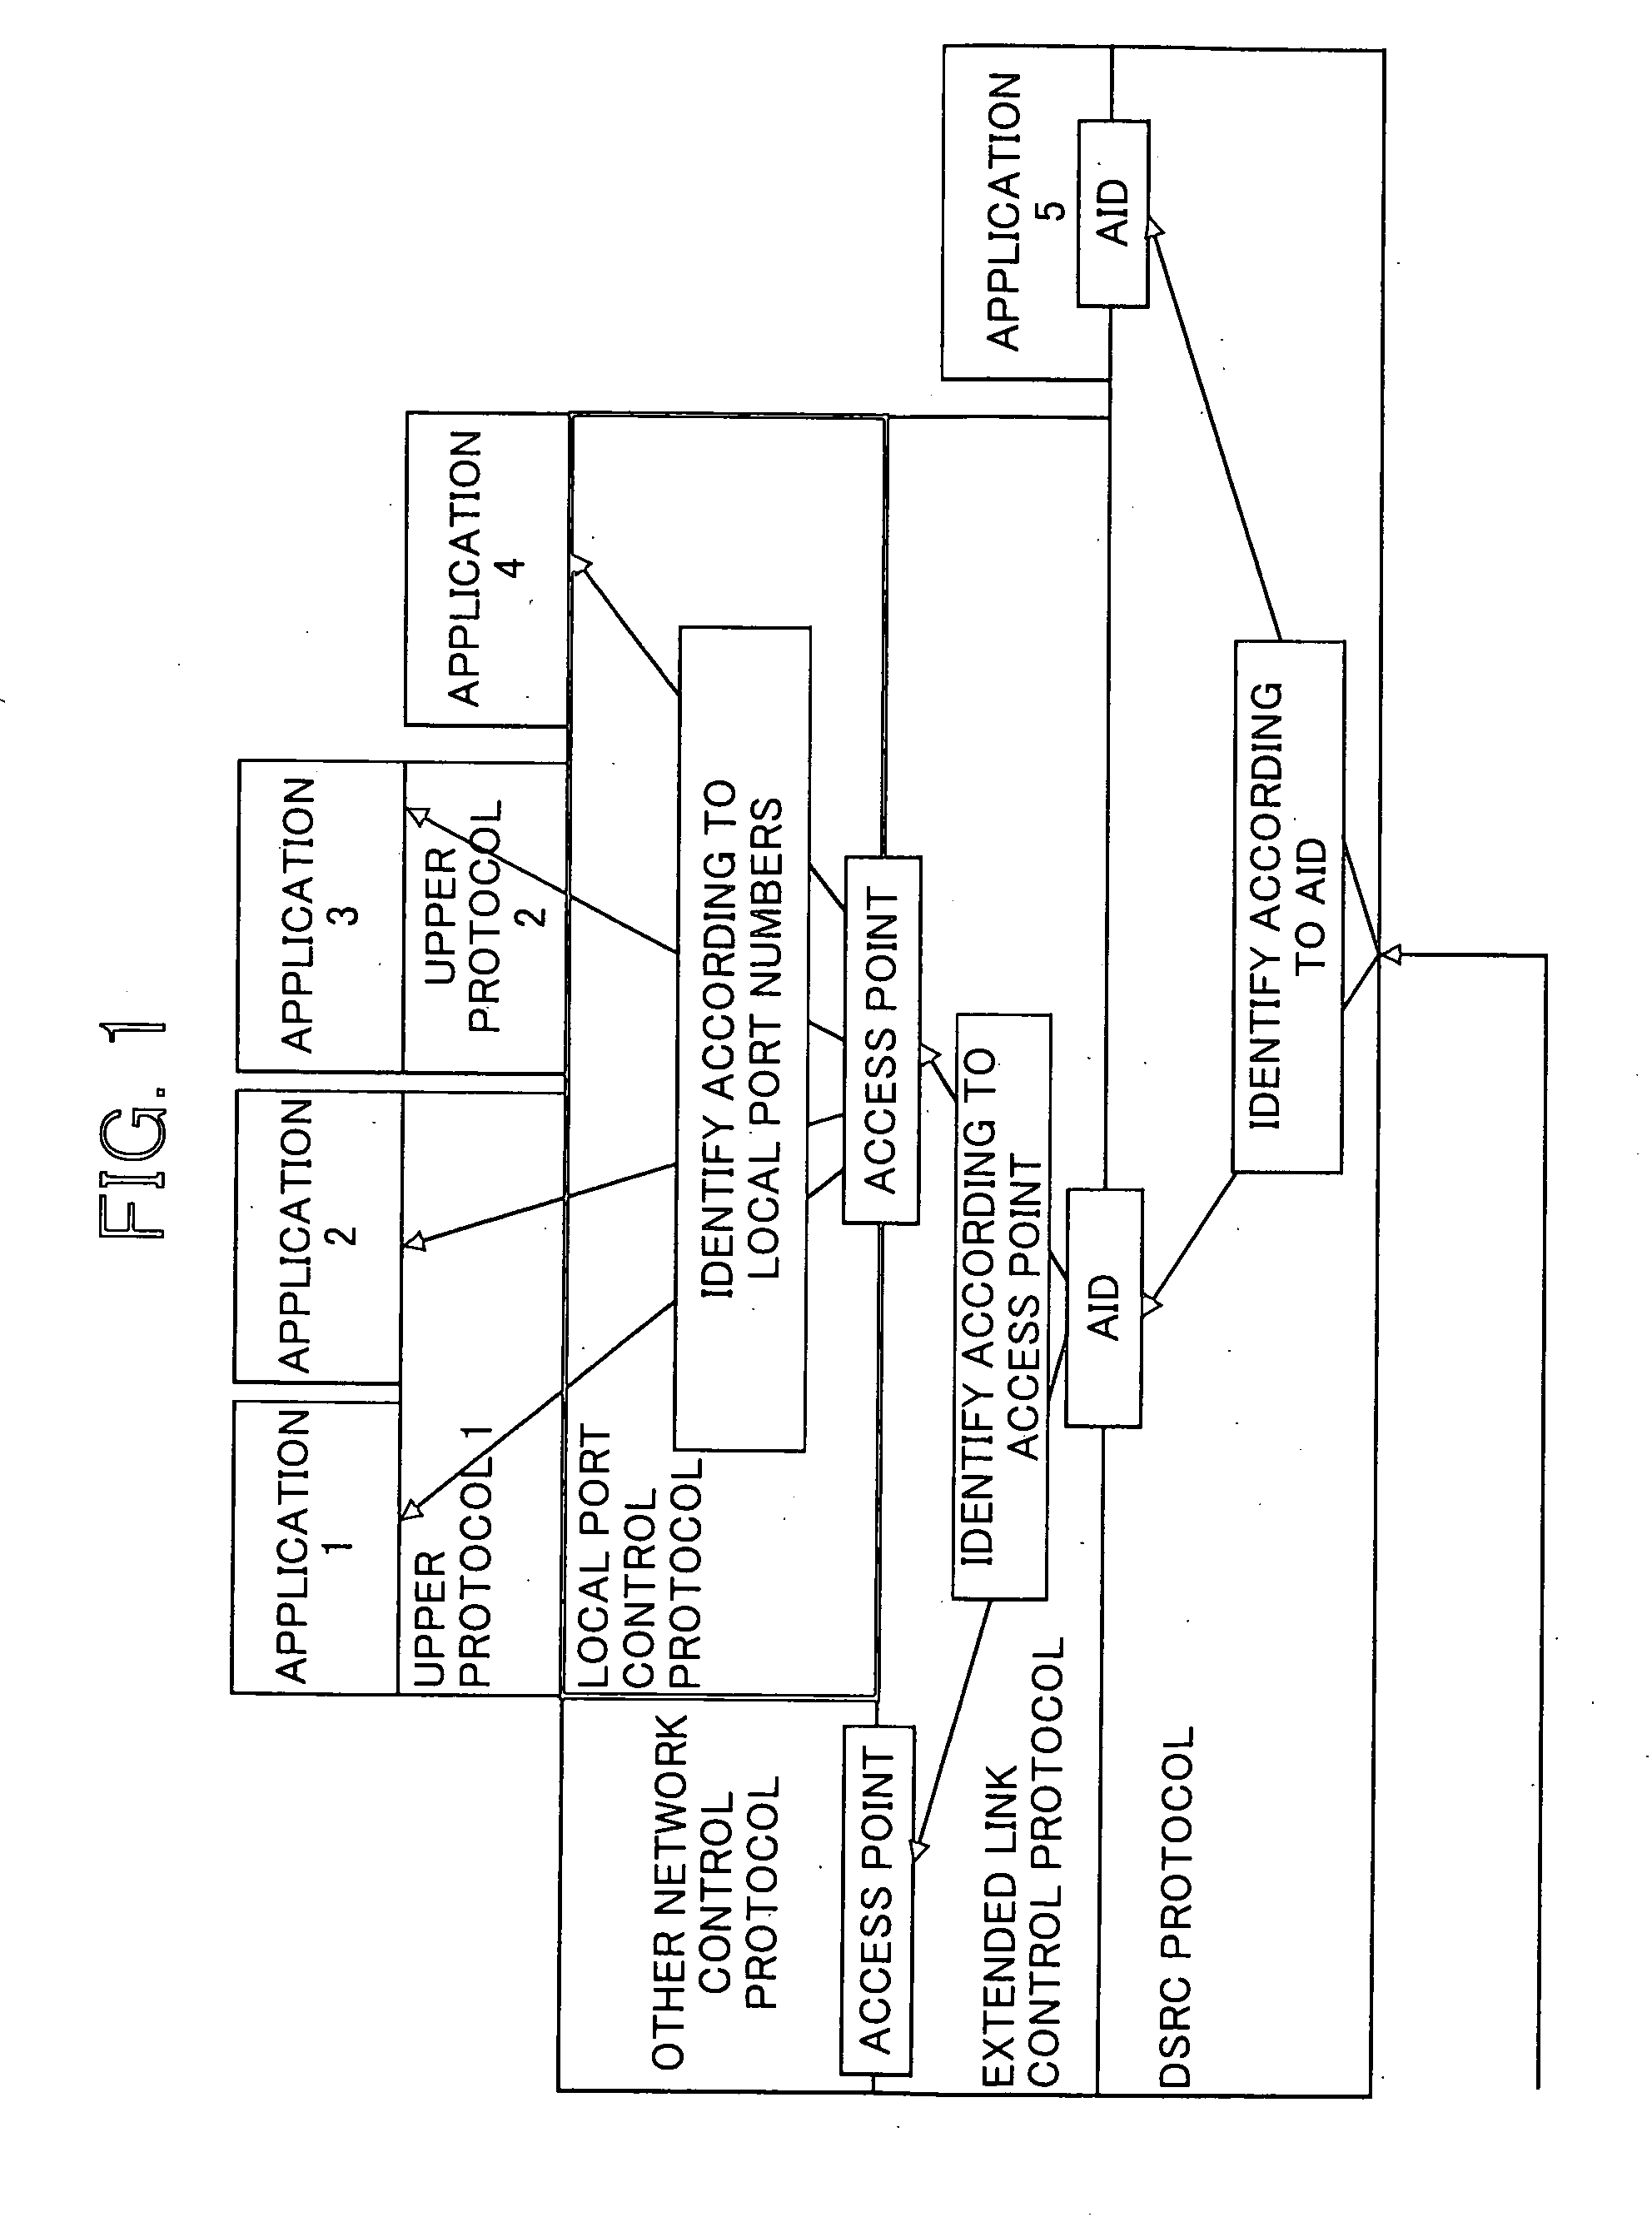 Between-load-and-vehicle communication system